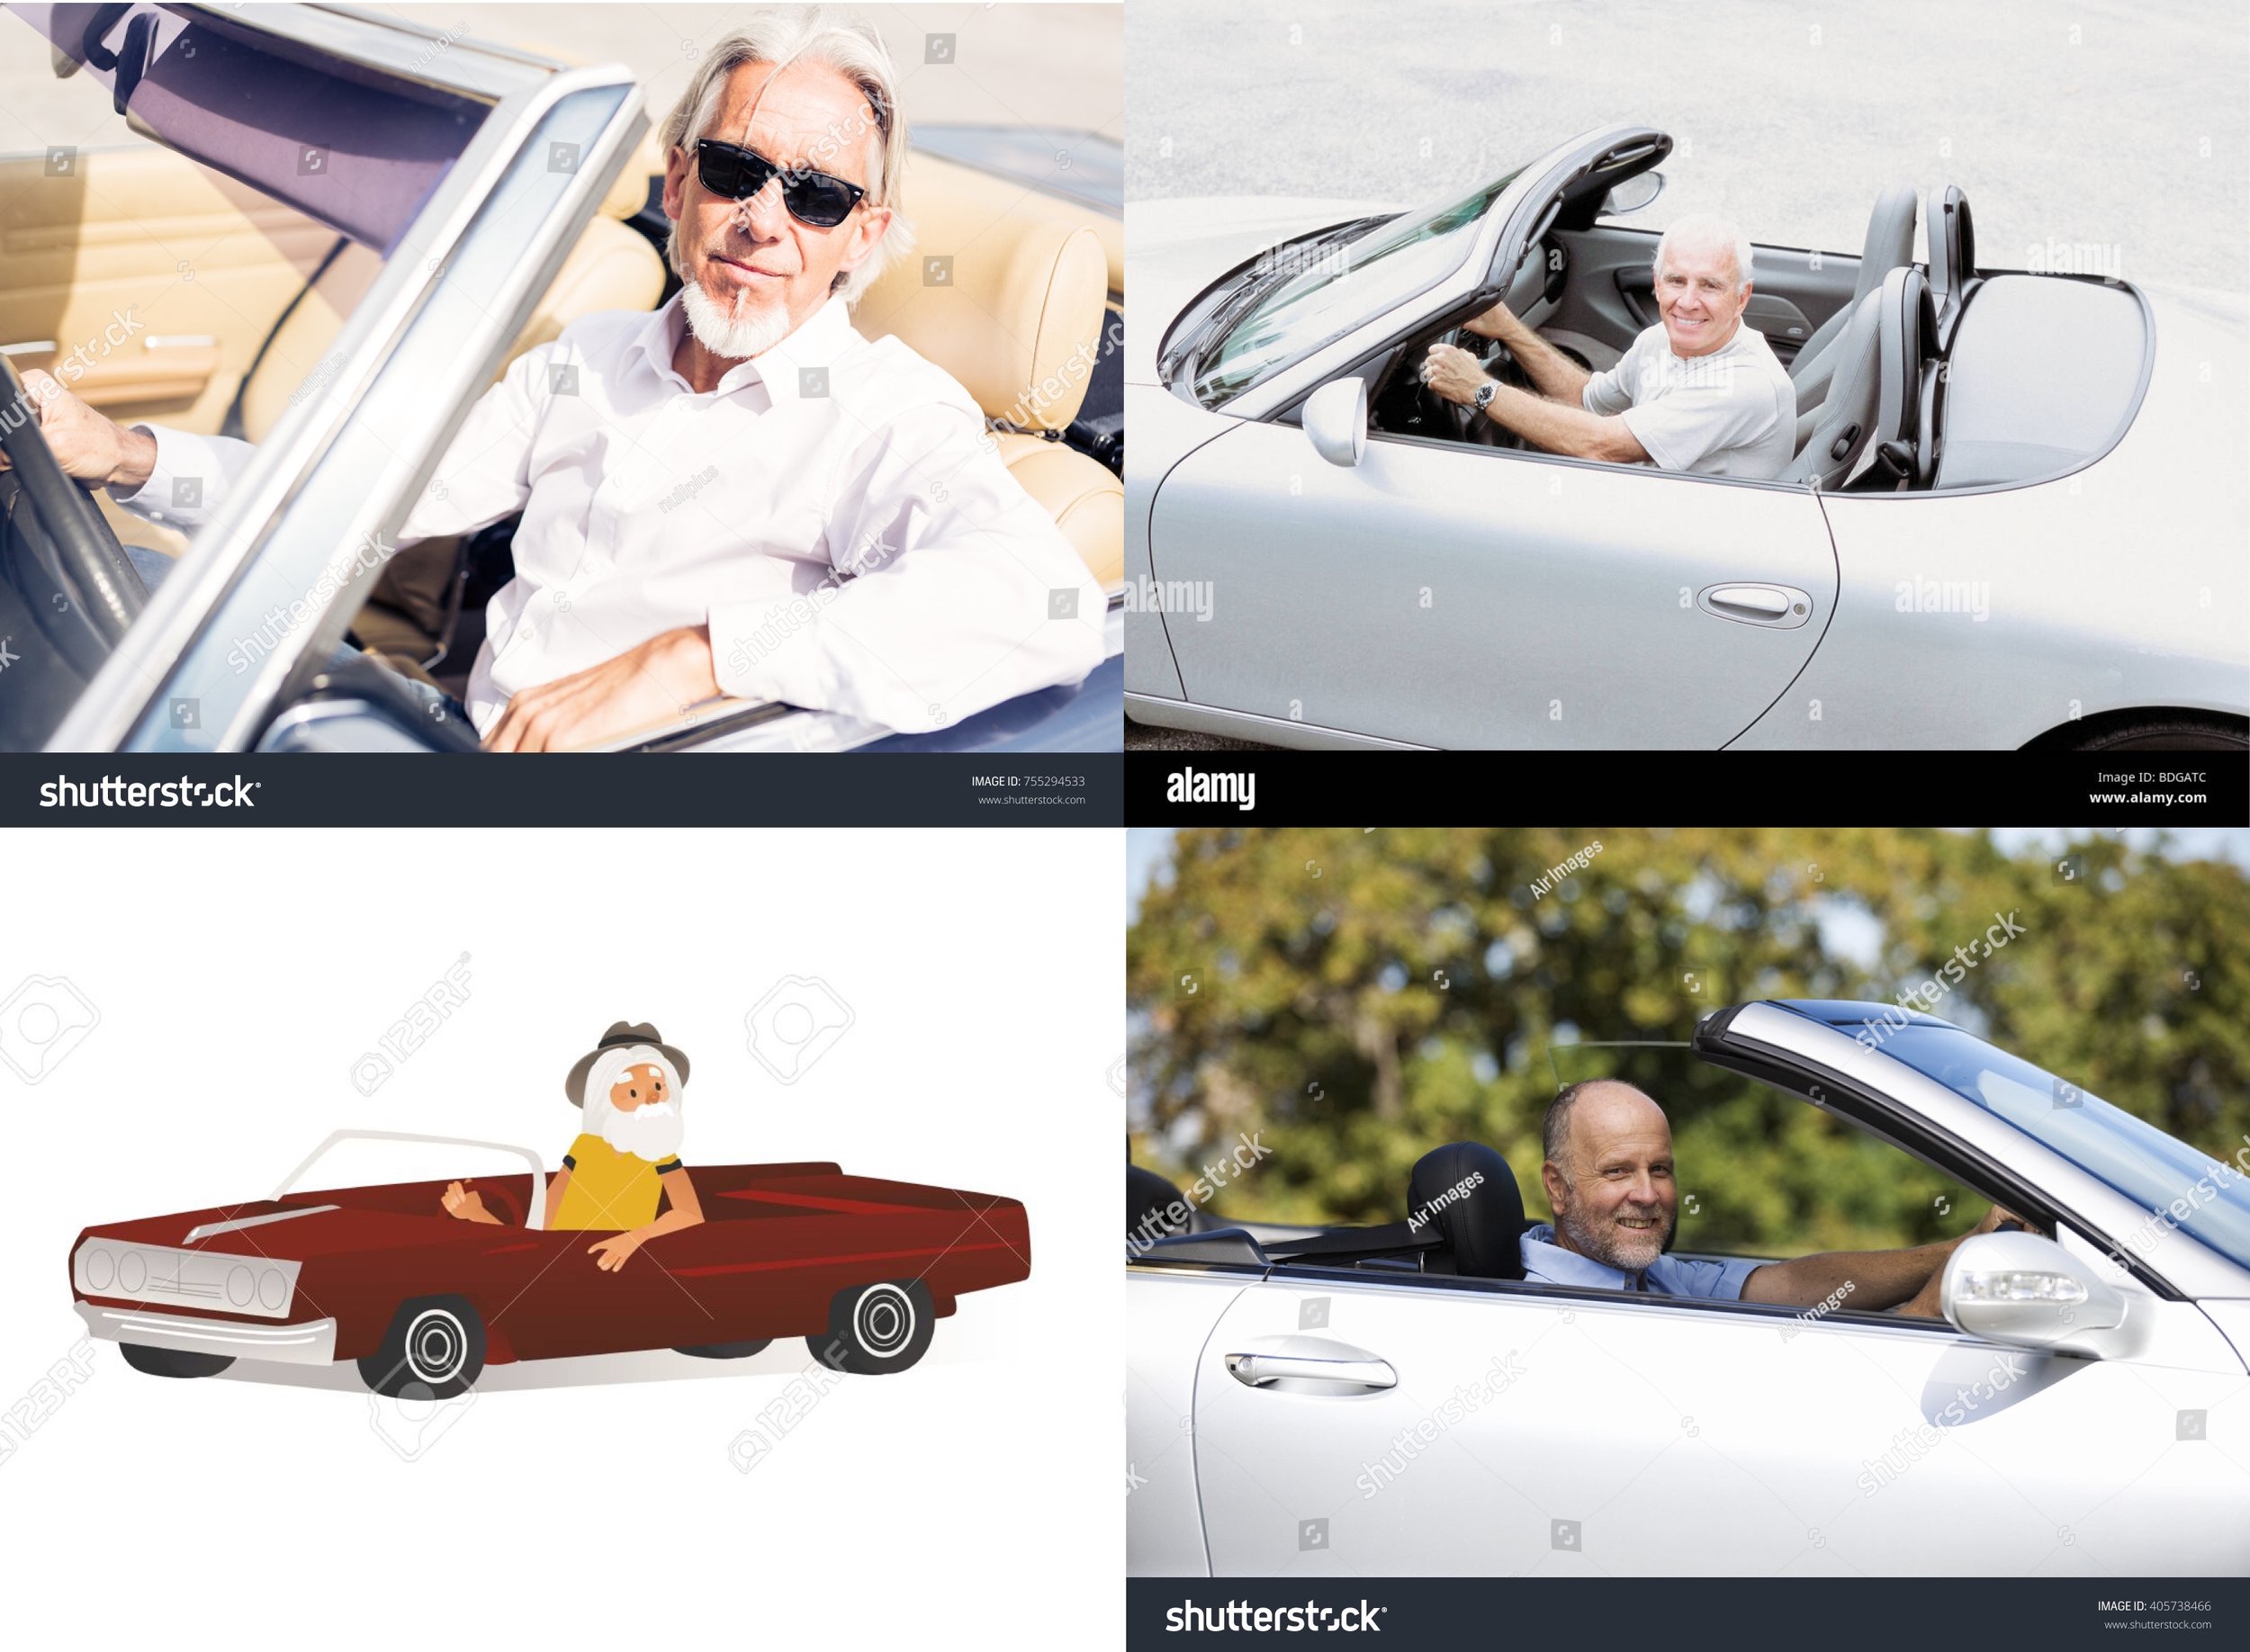 Typical stock photos of people driving convertibles